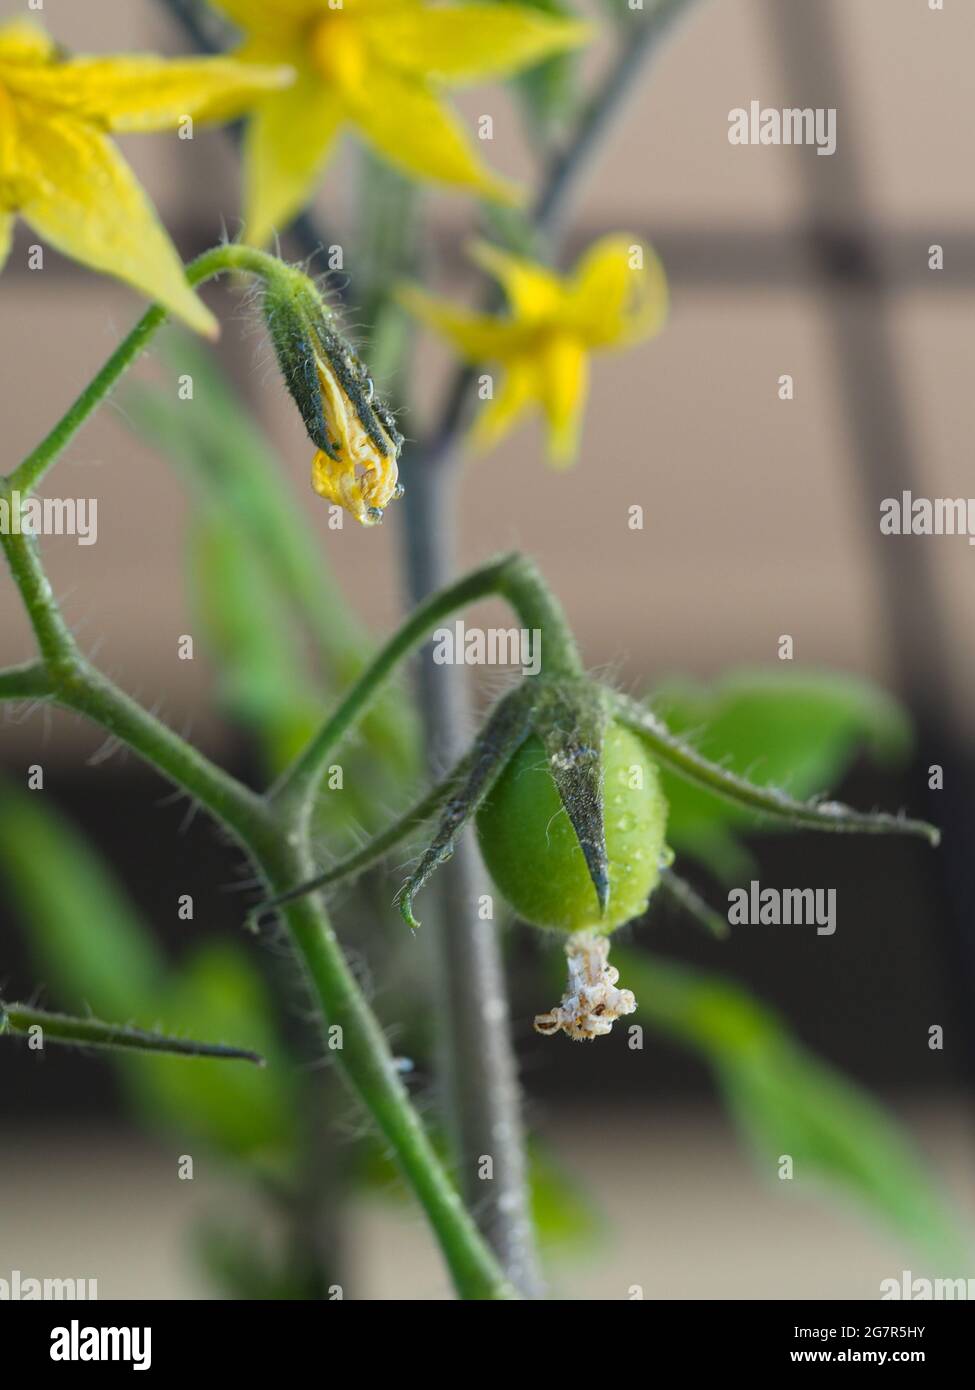 A still green tomato and hairy calyx growing with the remains of the flower hanging on by a thread, yellow flowers, Australian kitchen garden Stock Photo